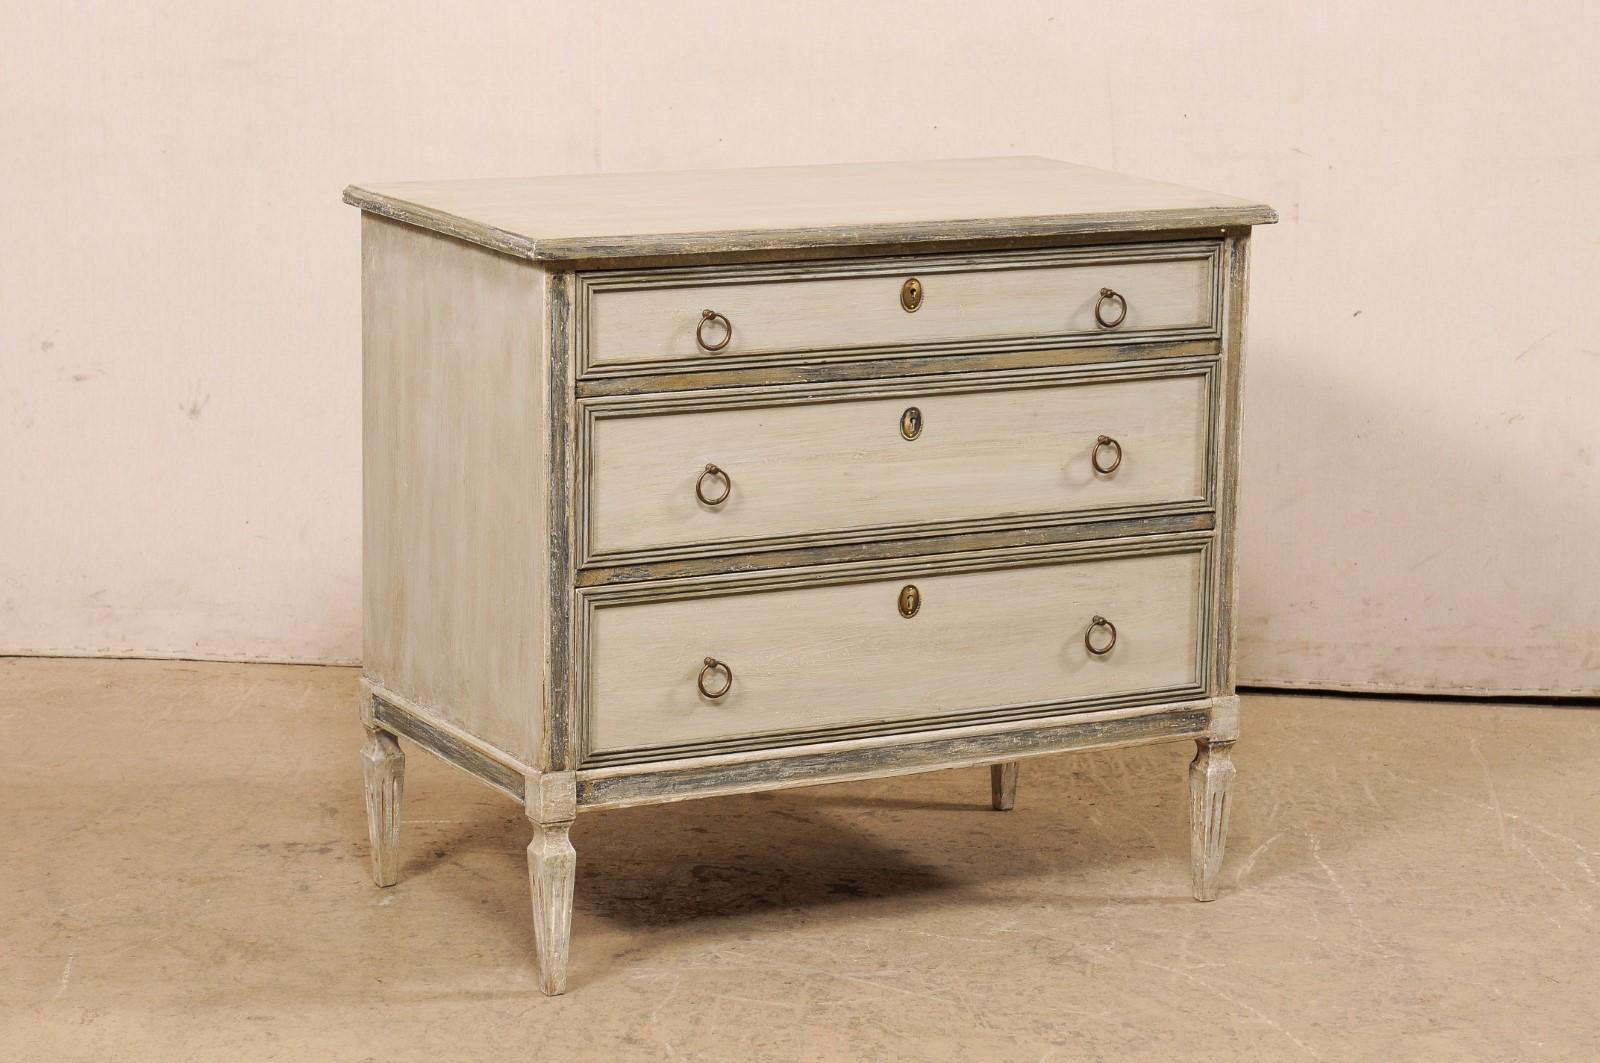 A Swedish Gustavian-style painted wood chest from the Mid-20th Century. This mid-century chest from Sweden, designed in typical Gustavian style, features a simple, clean design with slightly overhanging top over case which houses three graduated